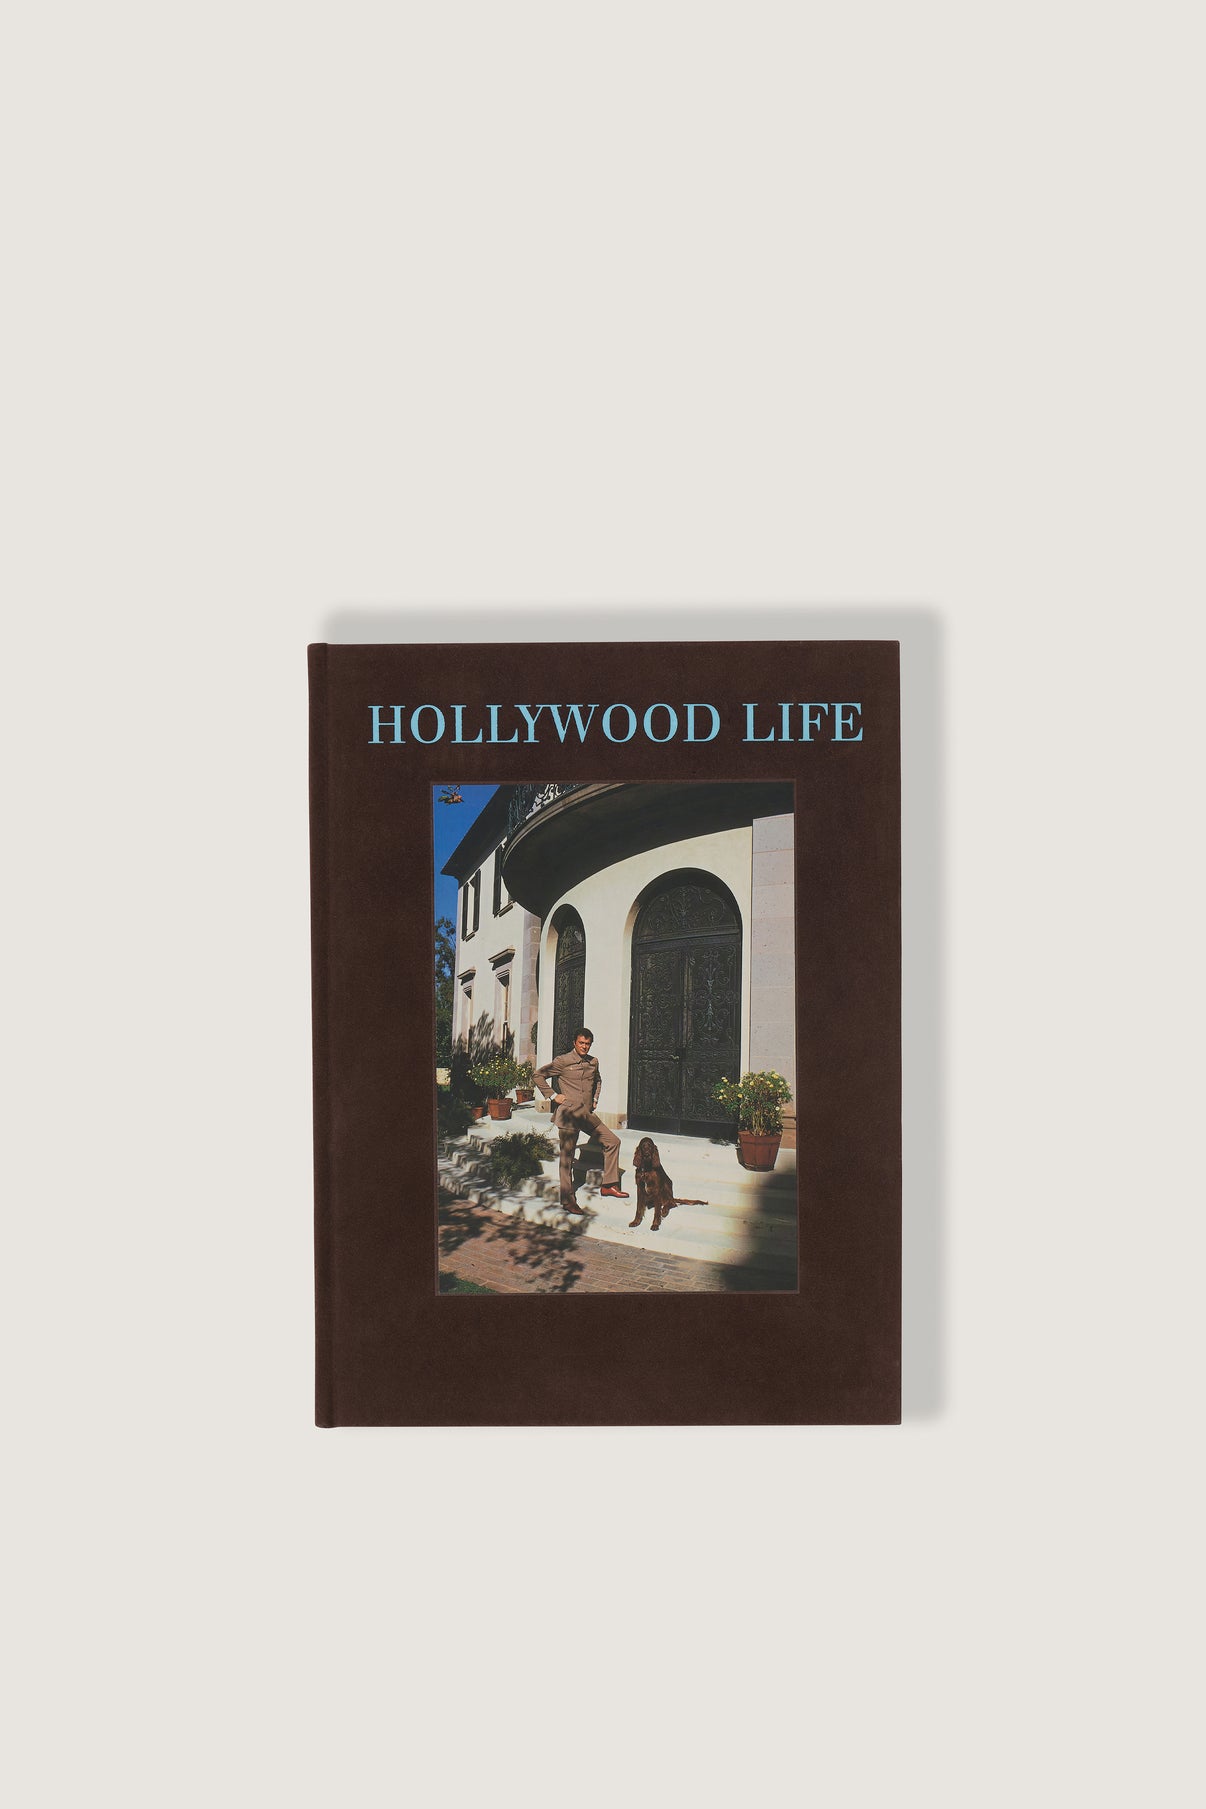 BOOK "HOLLYWOOD LIFE" vue 1